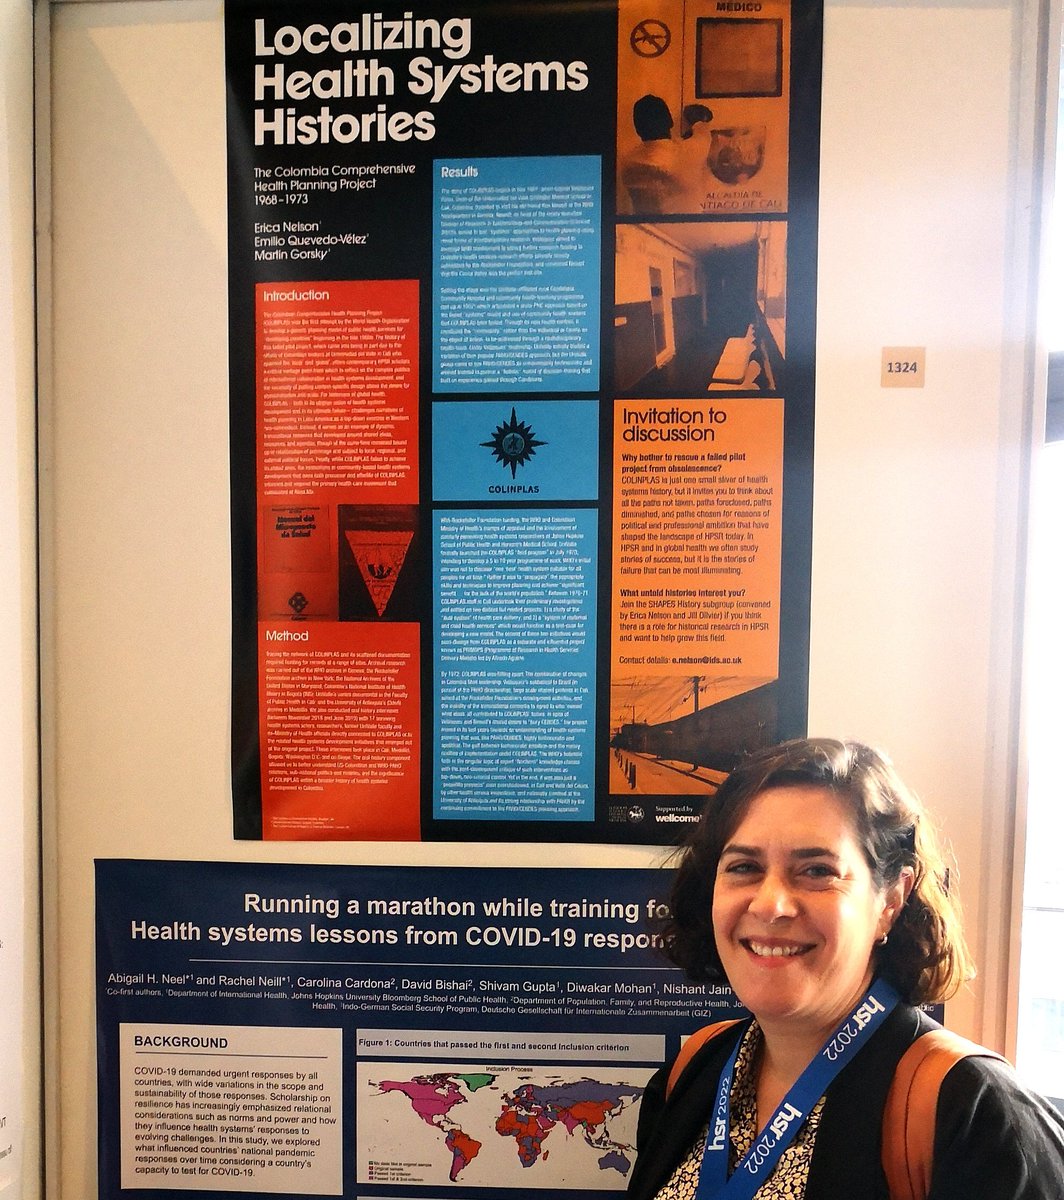 #HSR2022 don't forget to look at the posters! This one with #TWGShapes 's Erica Nelson - leading the conversation on Health System Histories in SHAPES @H_S_Global